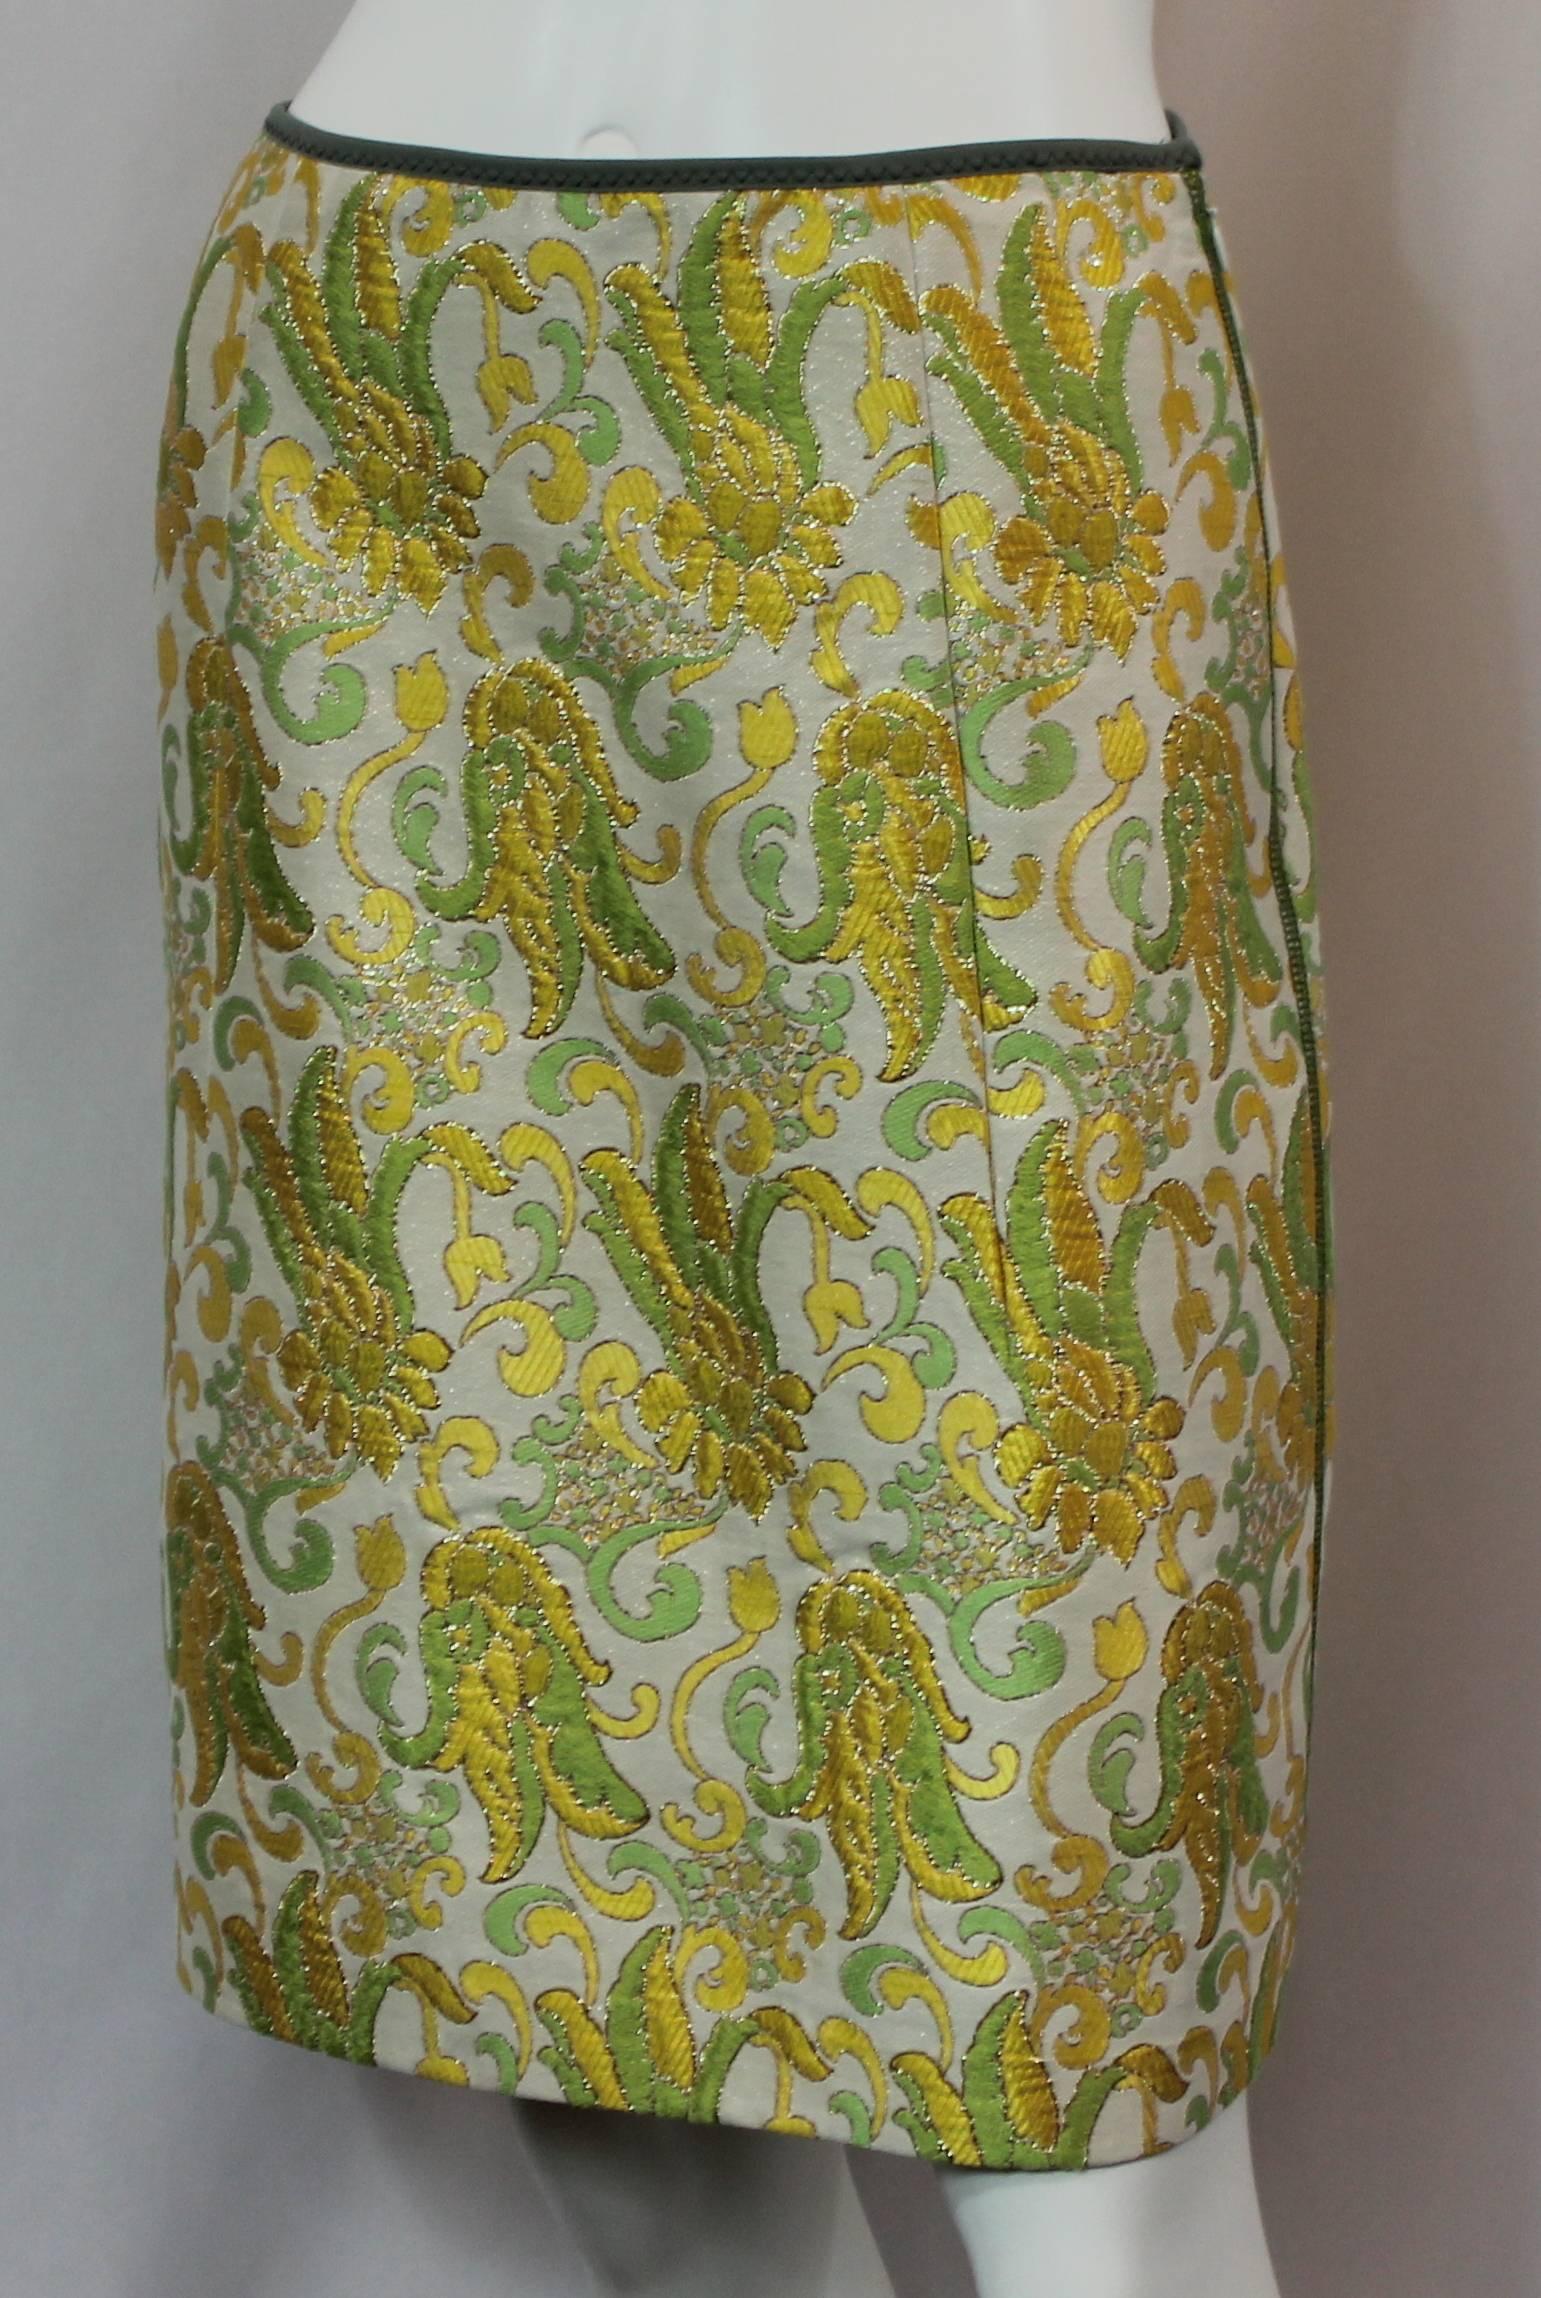 Prada Silk Blend Multi-Colored Printed Brocade Skirt - 40. This beautiful yellow, green, and ivory printed brocade skirt has gold stitching and olive trim on the waist. It also has a side zipper and is in excellent condition.

Measurements: